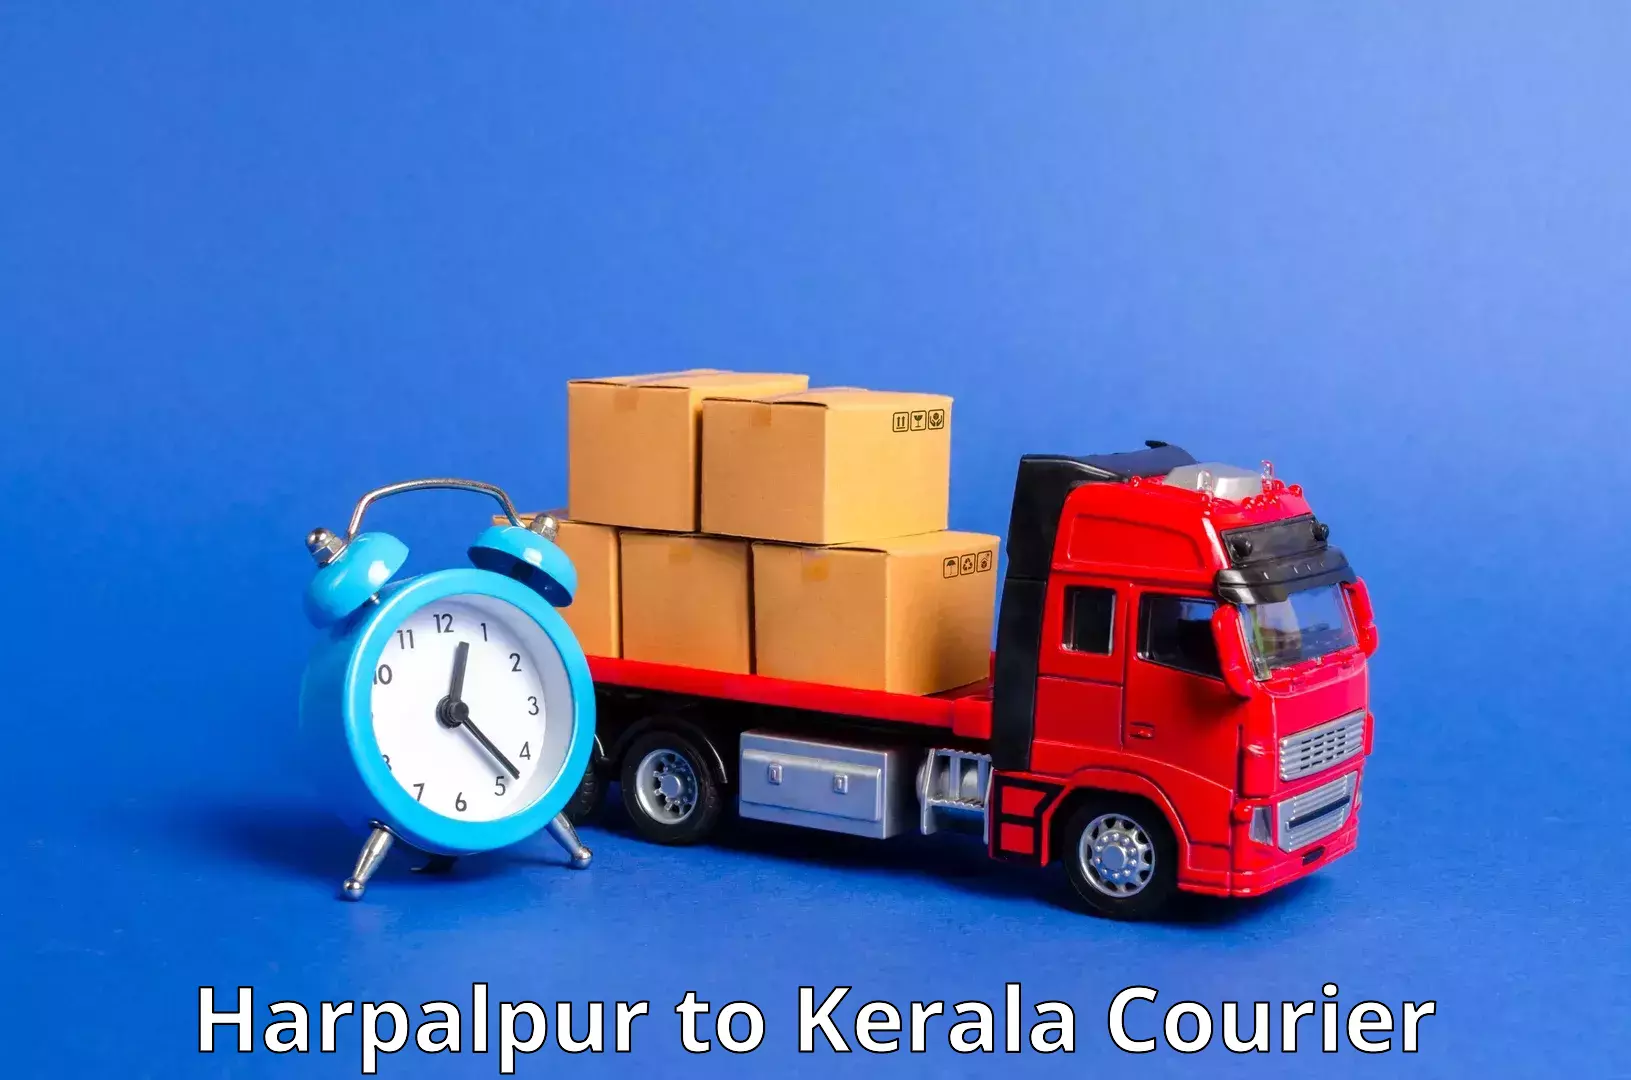 High-priority parcel service Harpalpur to Kerala